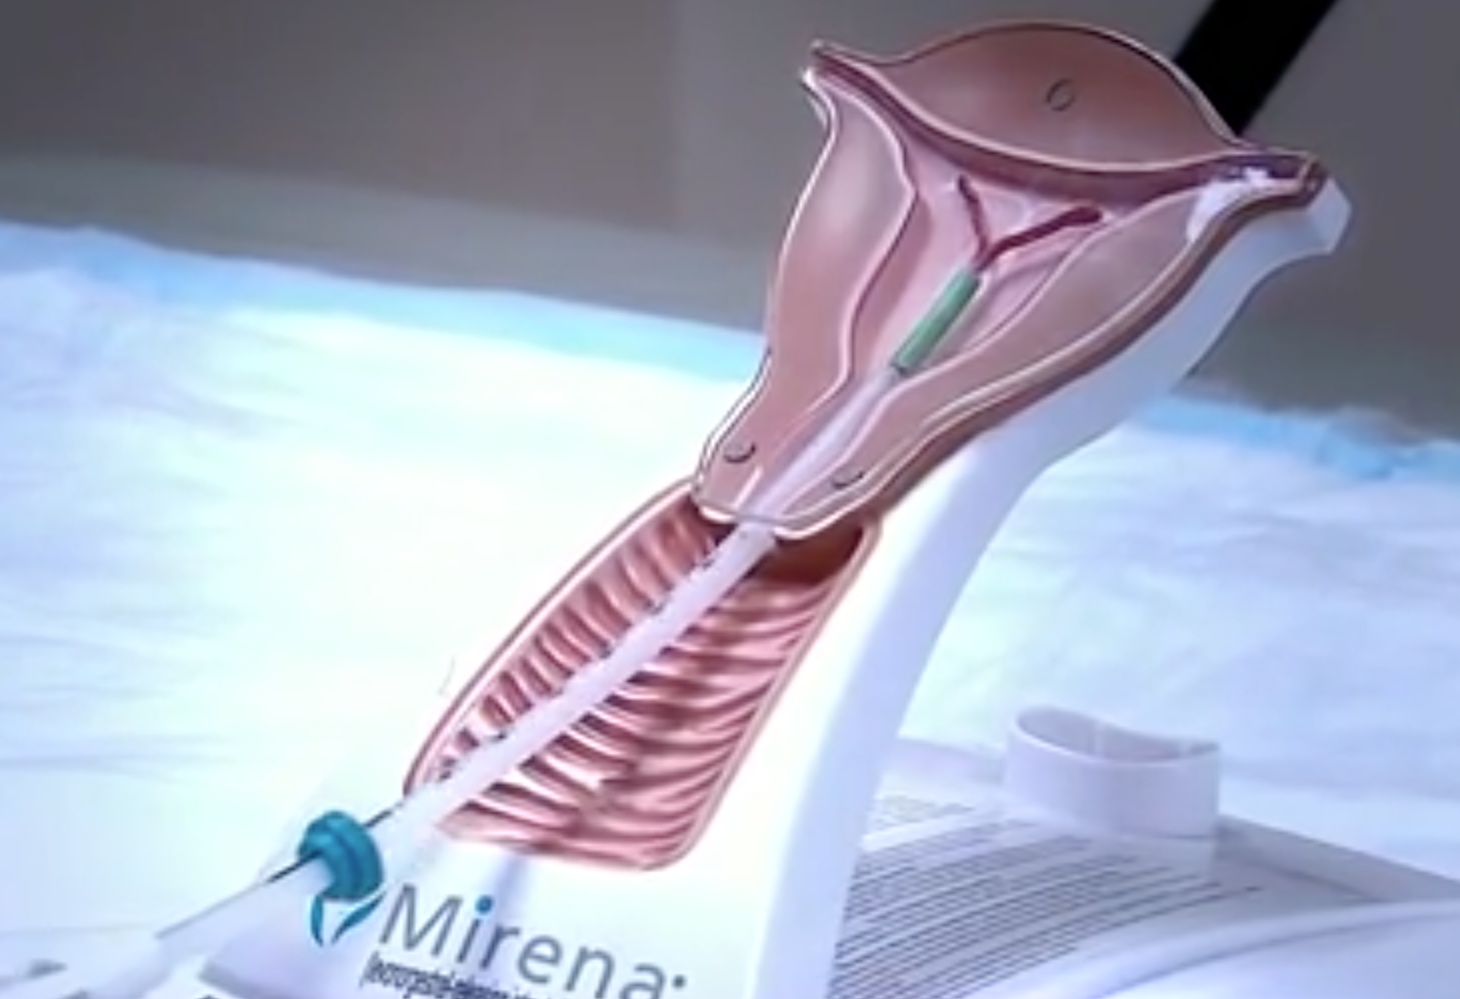 compensation-for-mirena-iud-victims-requiring-removal-surgery-sign-up-now